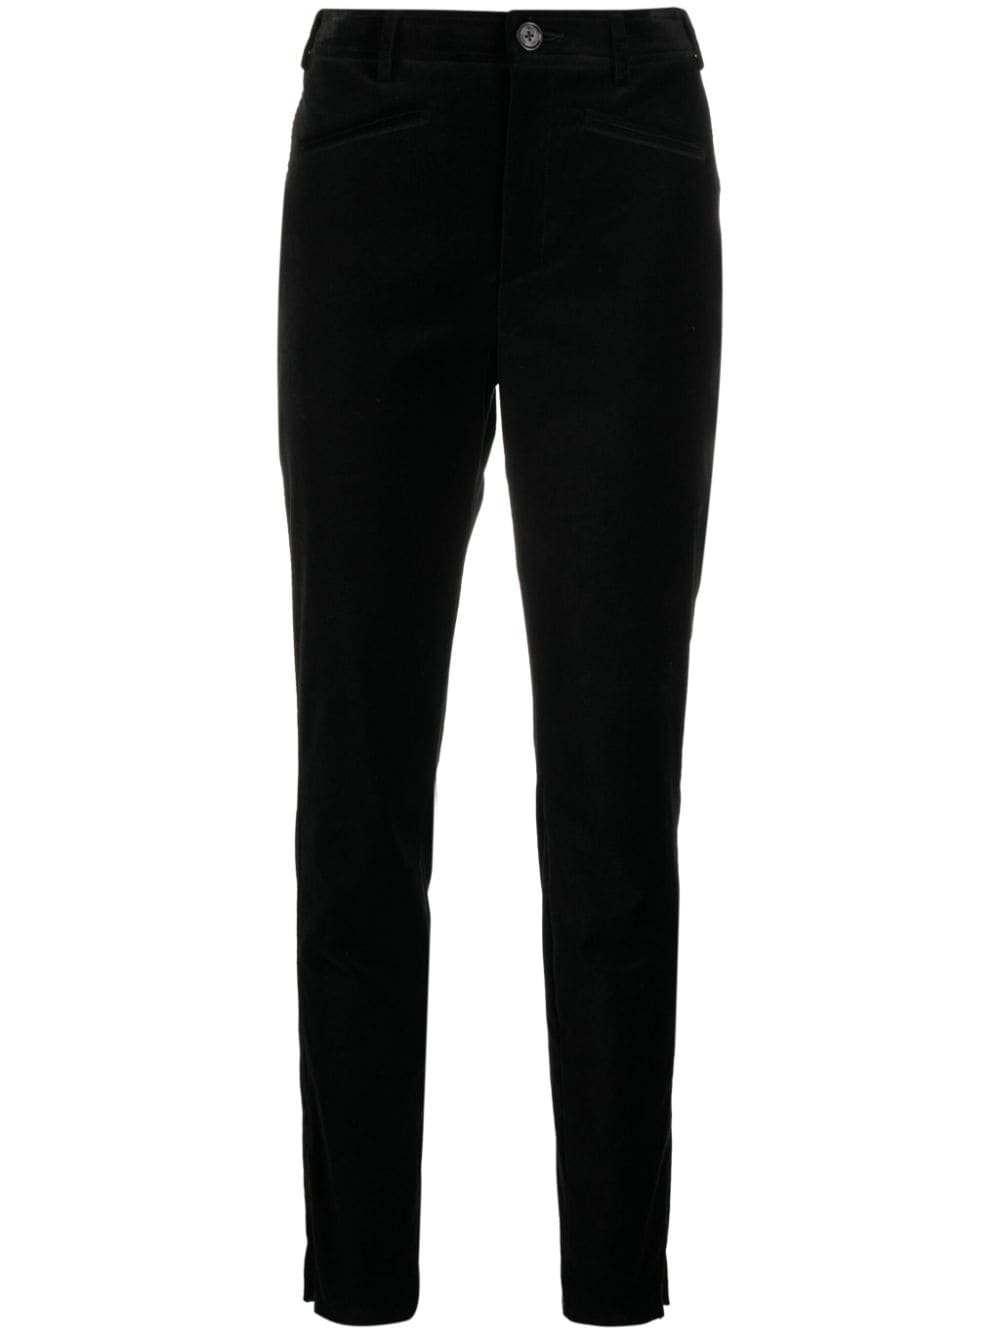 There Was One velvet-finish cotton blend trousers - Black von There Was One